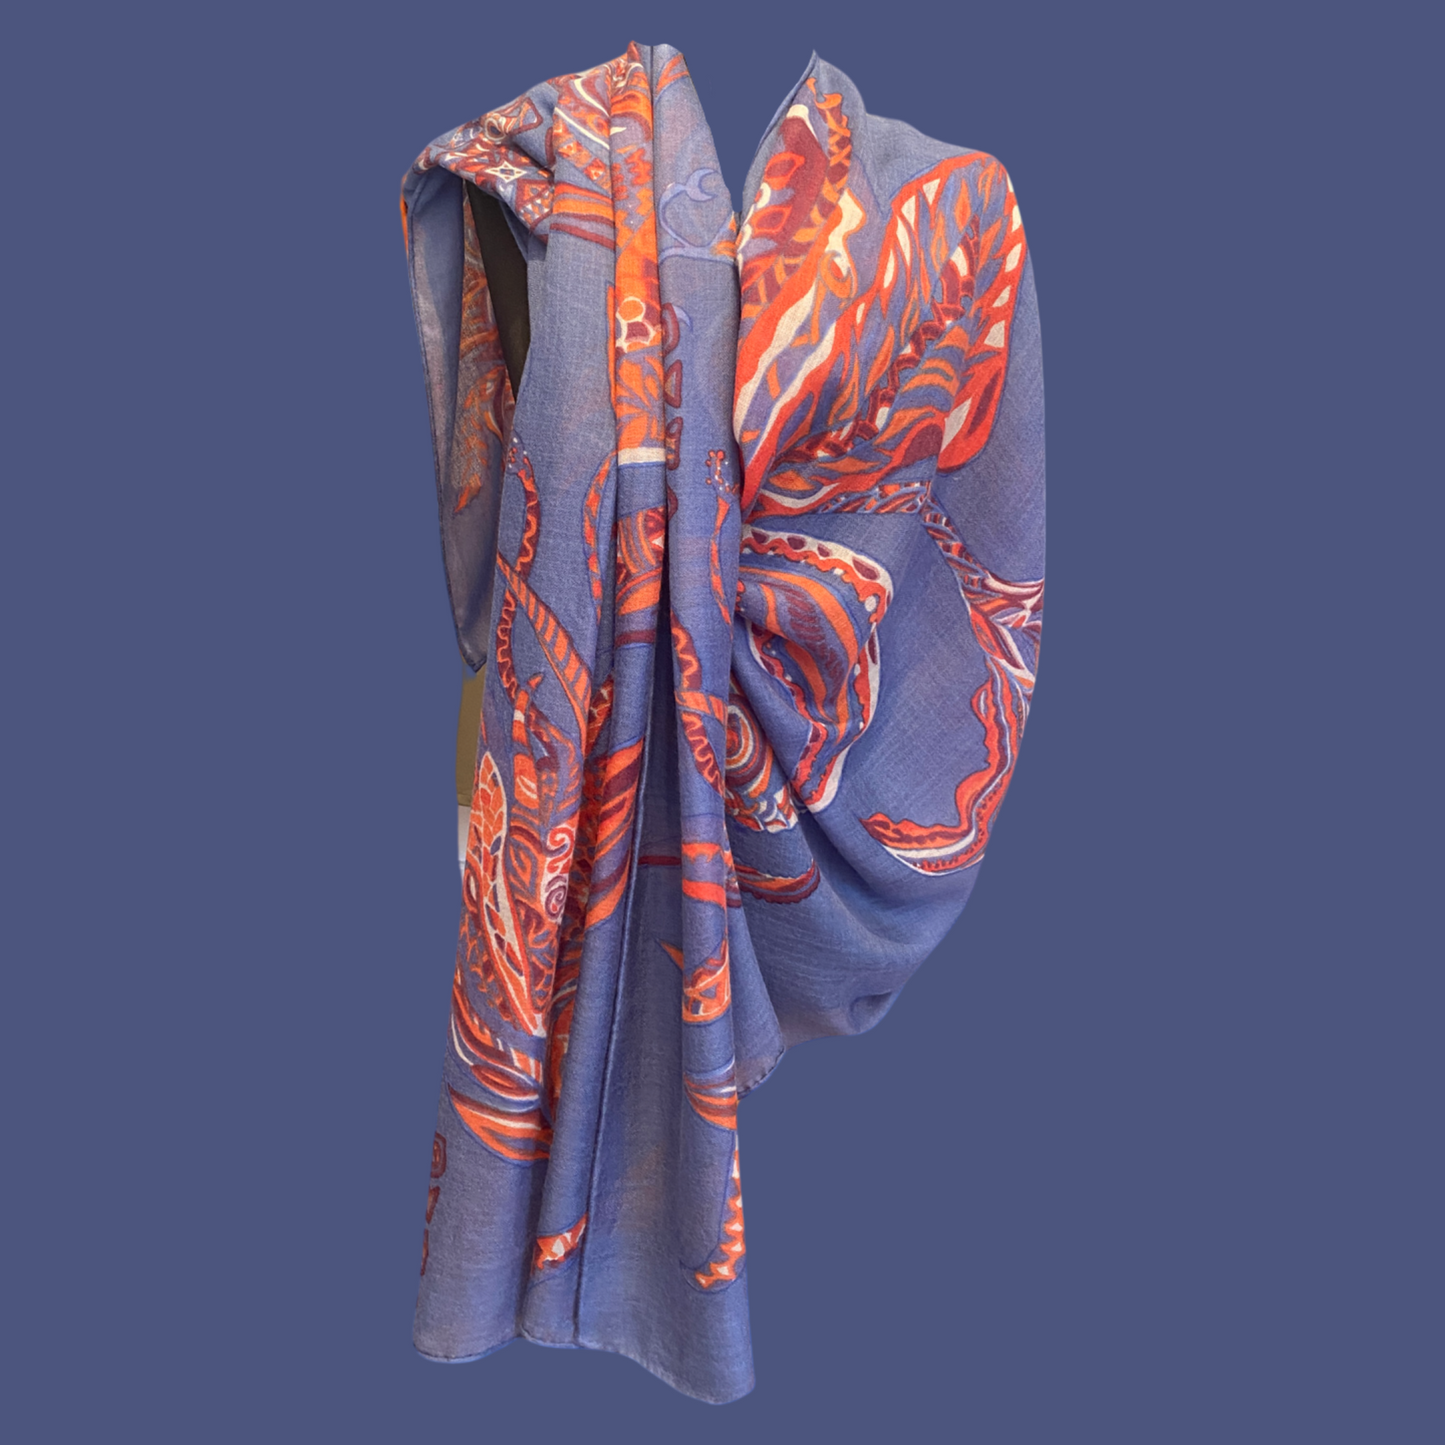 "SOUL FLOWERS" cashmere scarf - Handwoven from 100% light baby cashmere - 220x120 - bue/orange - Limited to 5 pieces